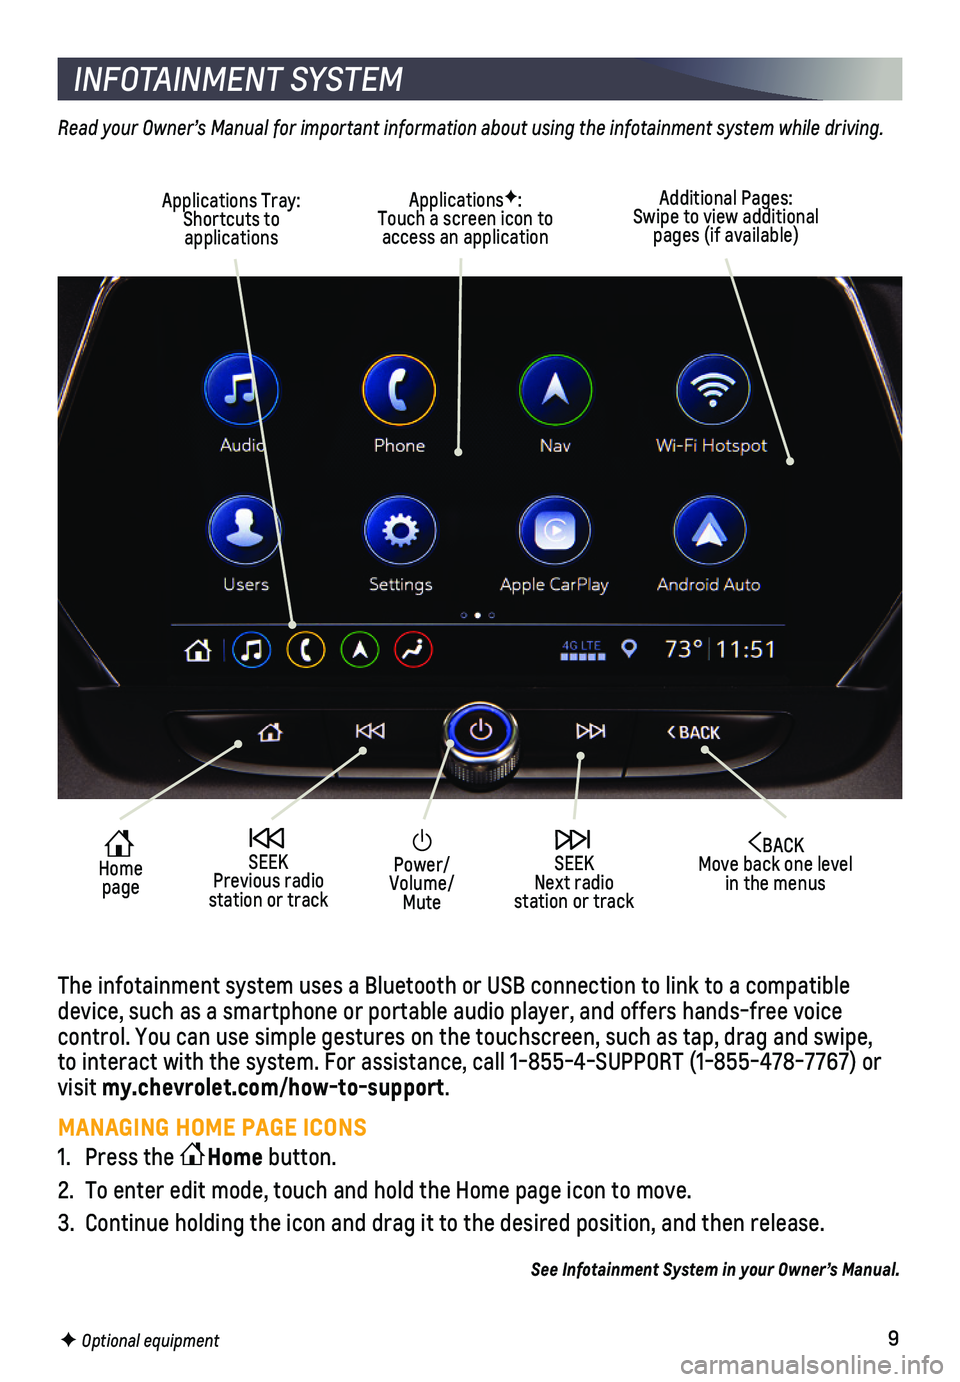 CHEVROLET BLAZER 2021  Get To Know Guide 9F Optional equipment   
INFOTAINMENT SYSTEM
Read your Owner’s Manual for important information about using the infotainment system while driving.
The infotainment system uses a Bluetooth or USB con